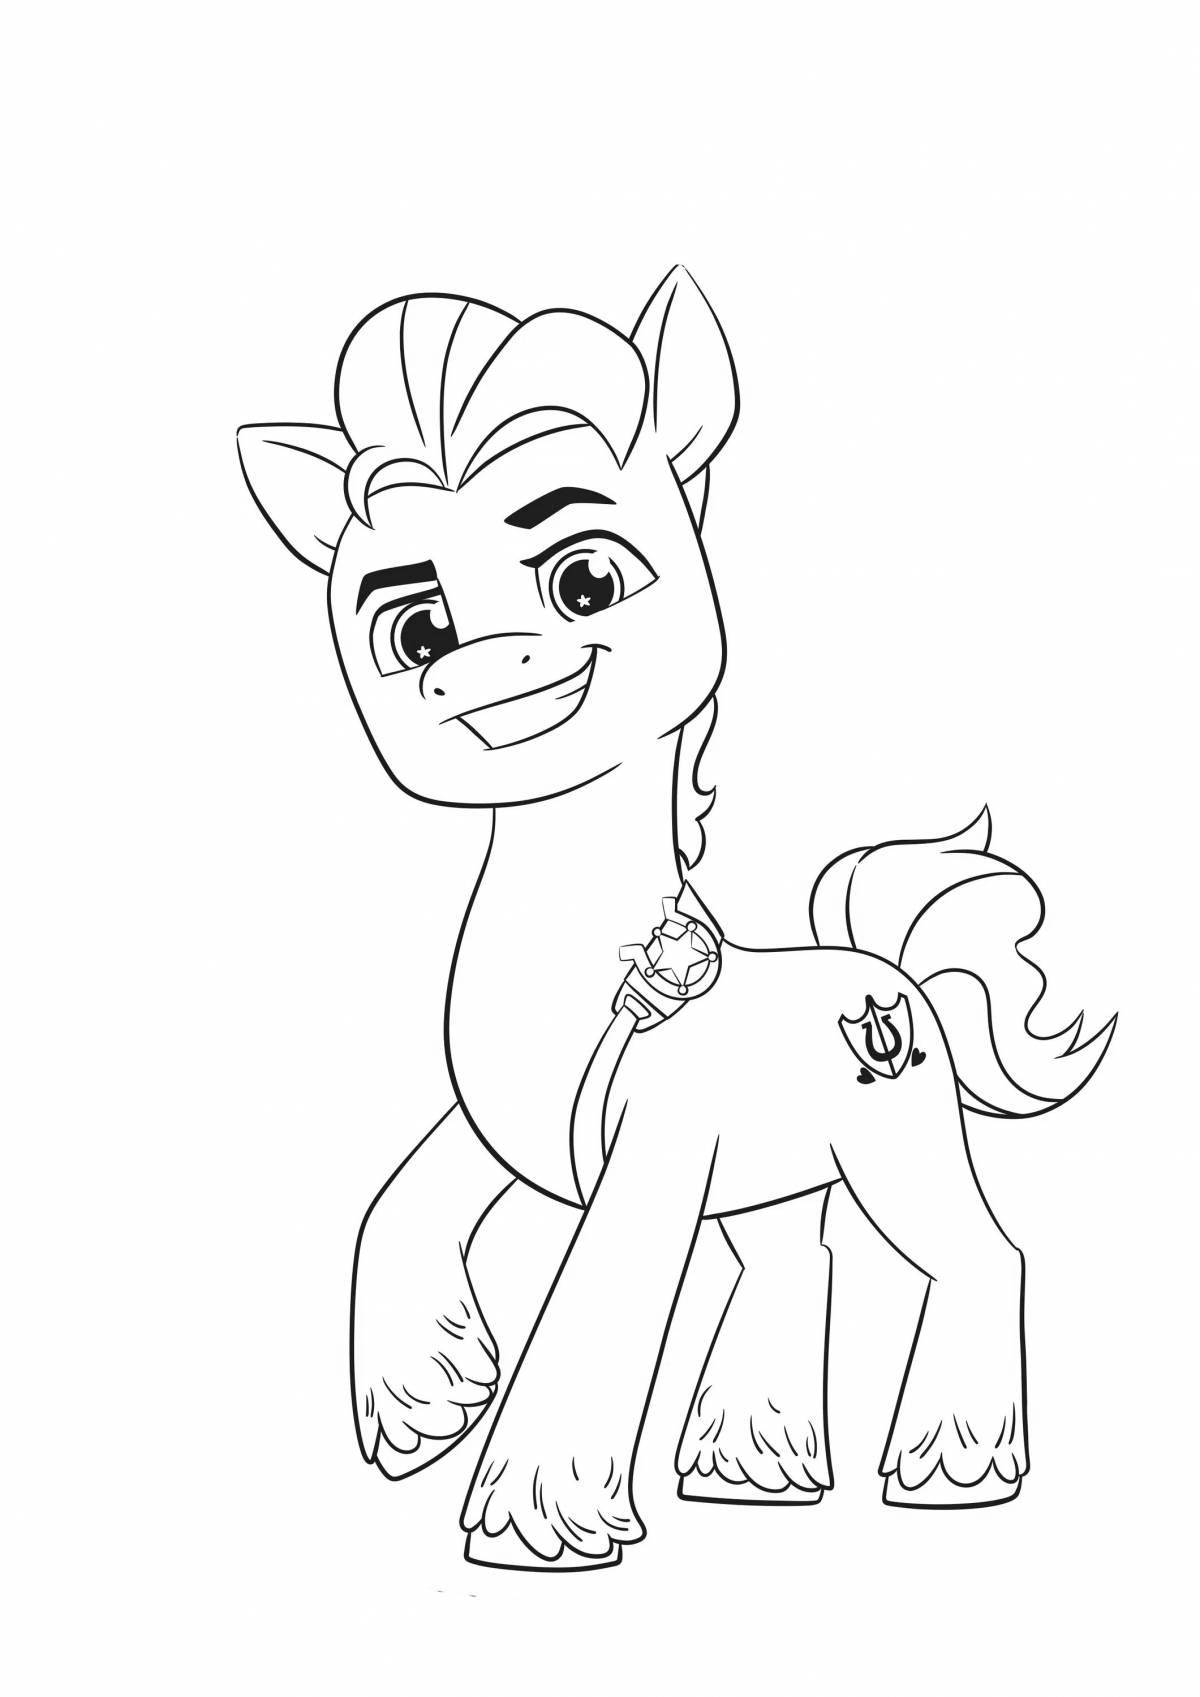 Great pony sleigh coloring page